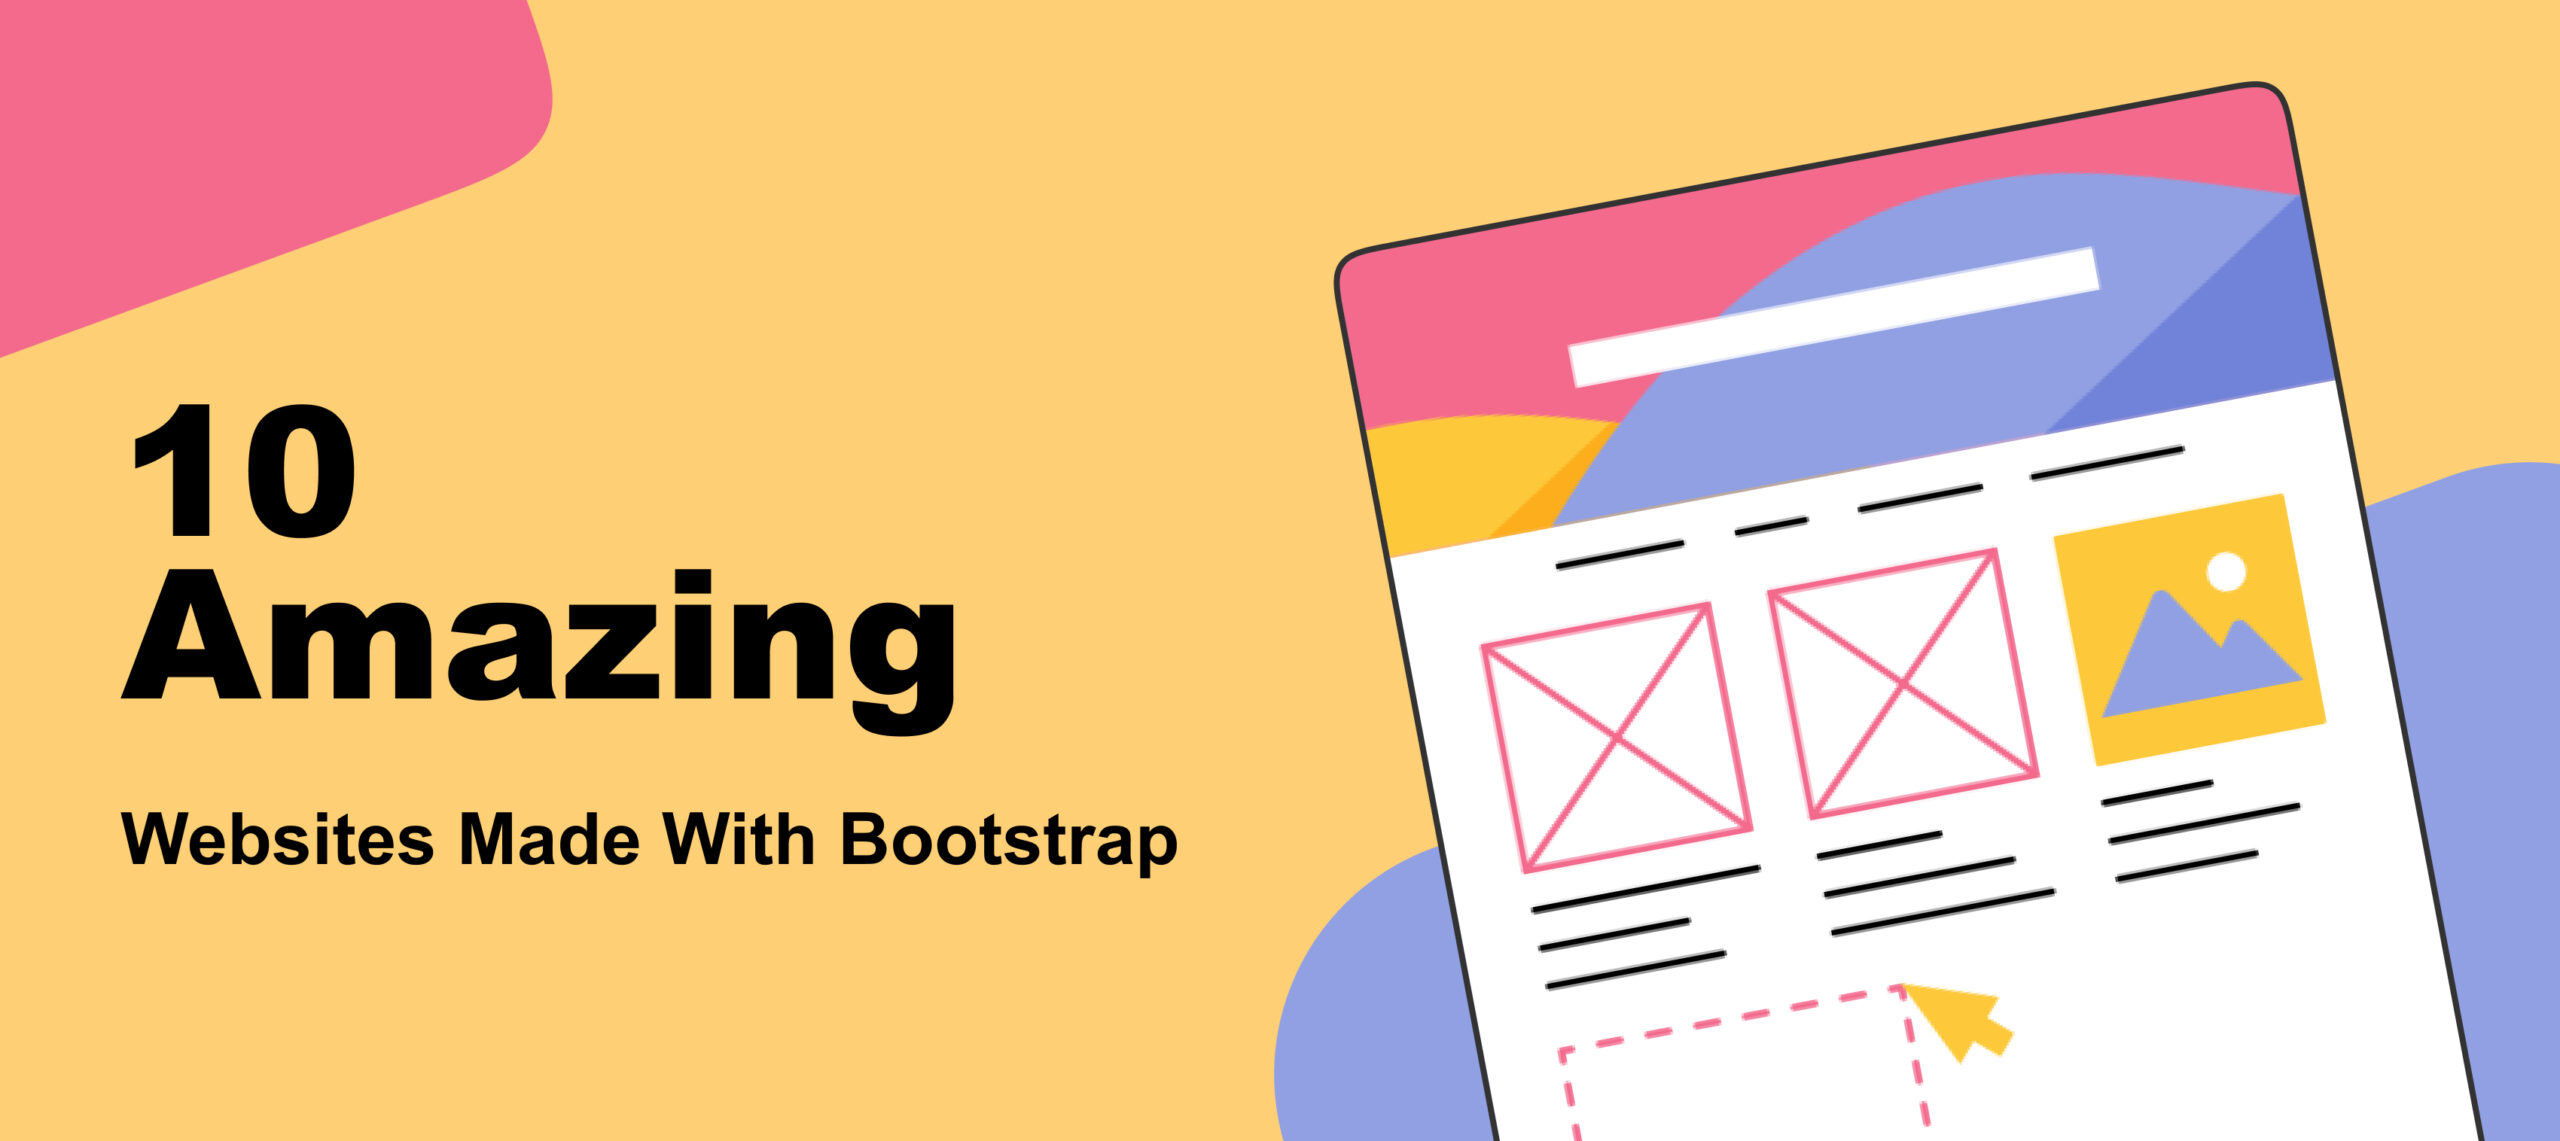  10 Amazing Websites Made With Bootstrap